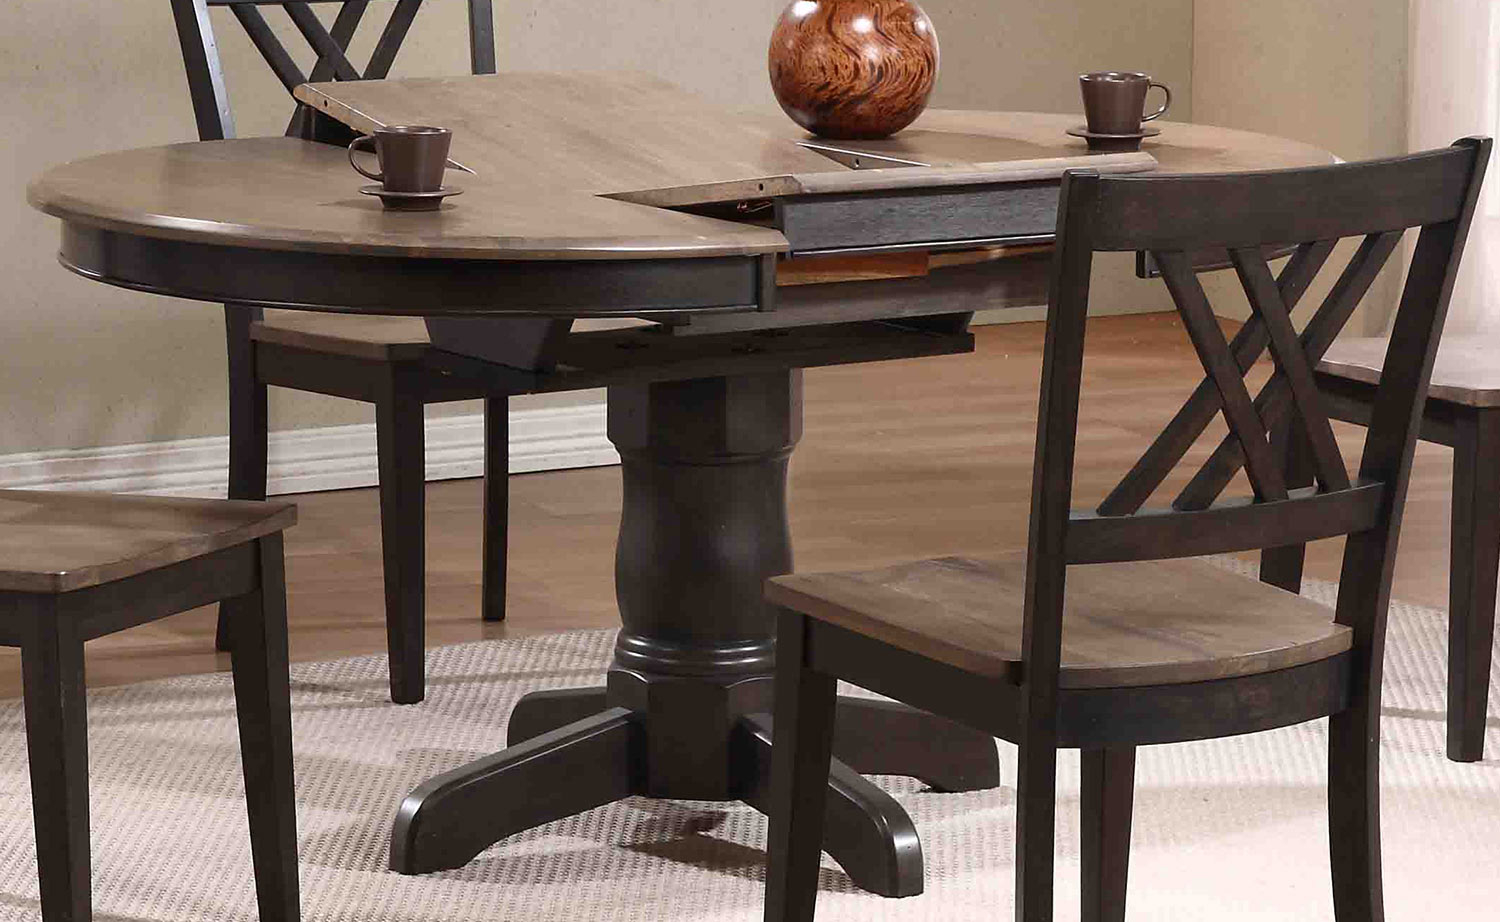  kitchen tables with leaf